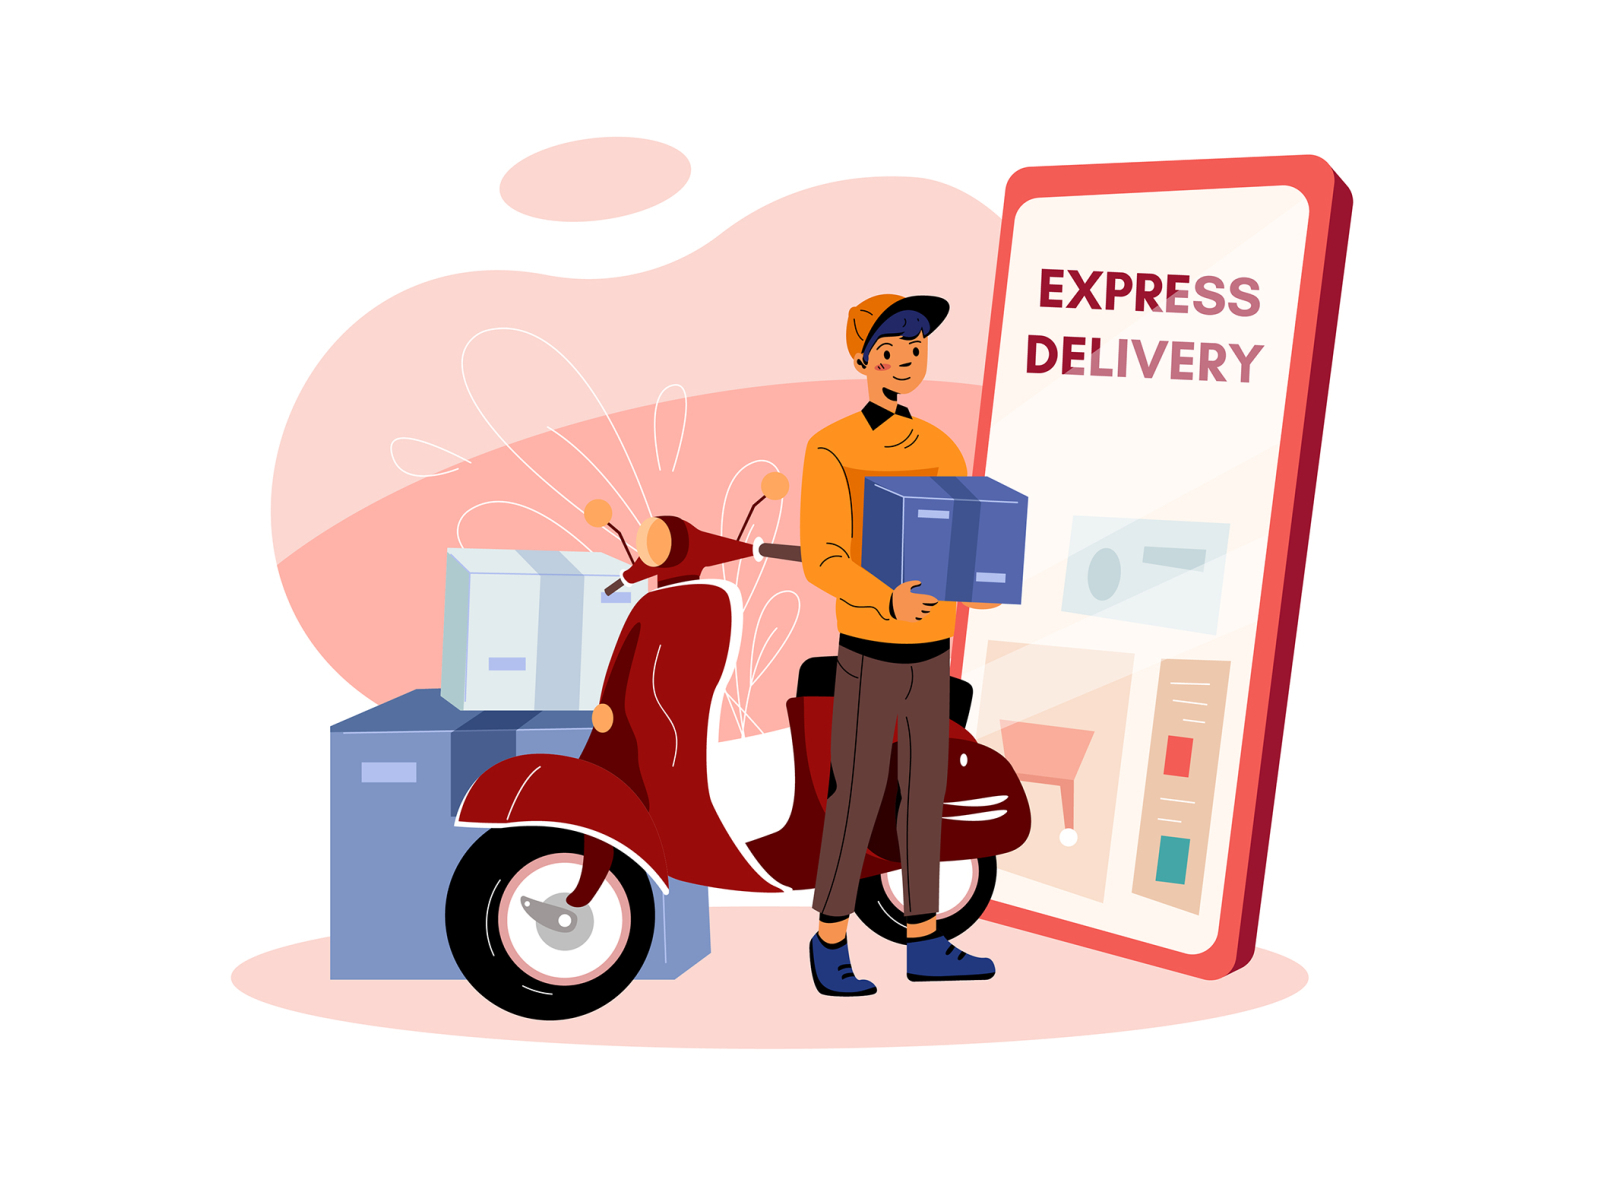 Delivery Package Illustration concept by HoangPts on Dribbble